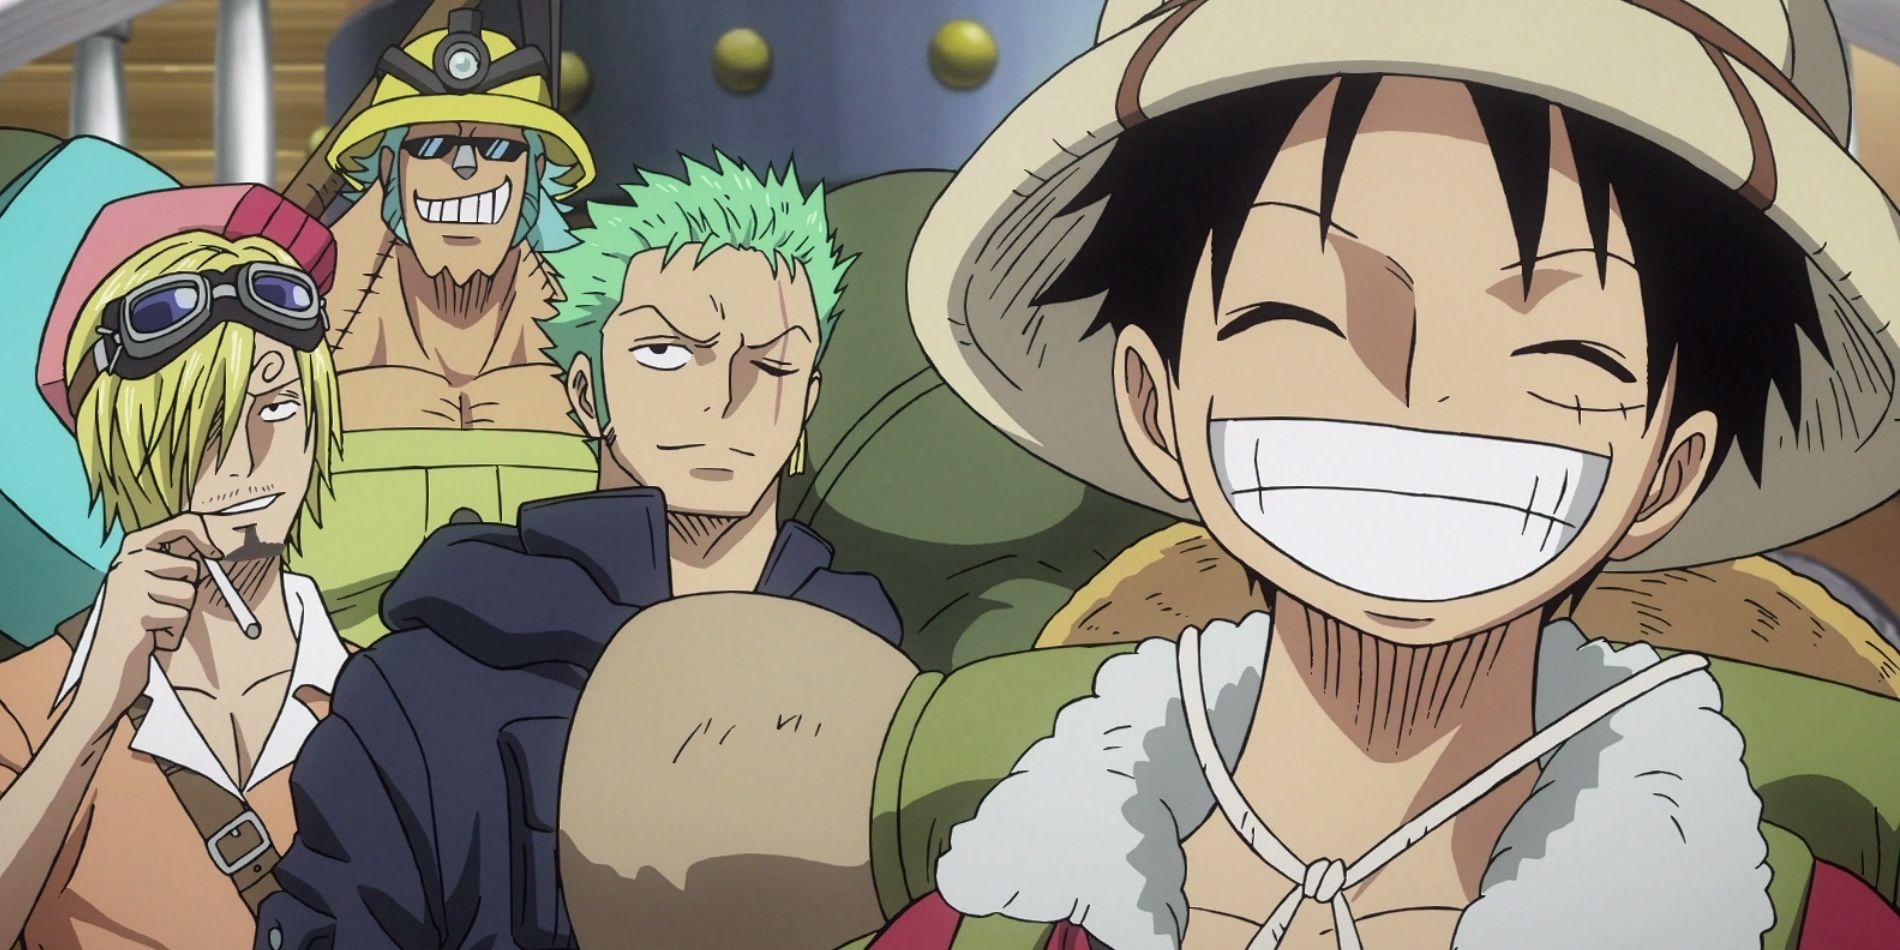 Luffy grins with his pirate crew behind him in One Piece: Heart of Gold